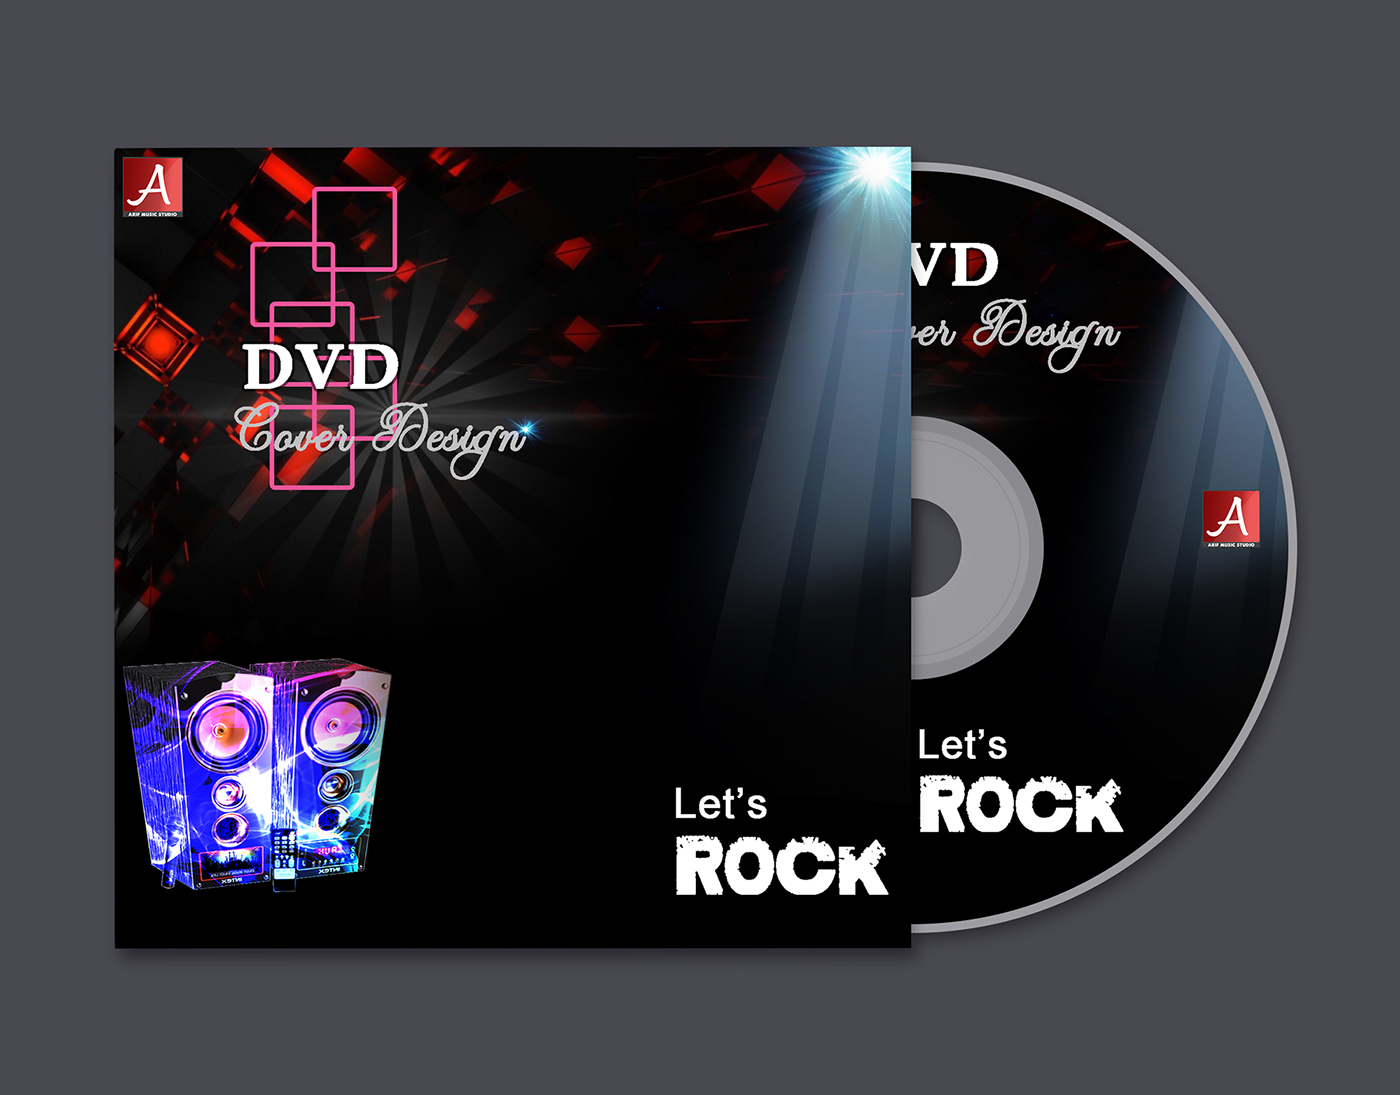 dvd cover design By Photoshop 2018 dvd cover DVD cd disk cover DVD video template Draphic design photoshop